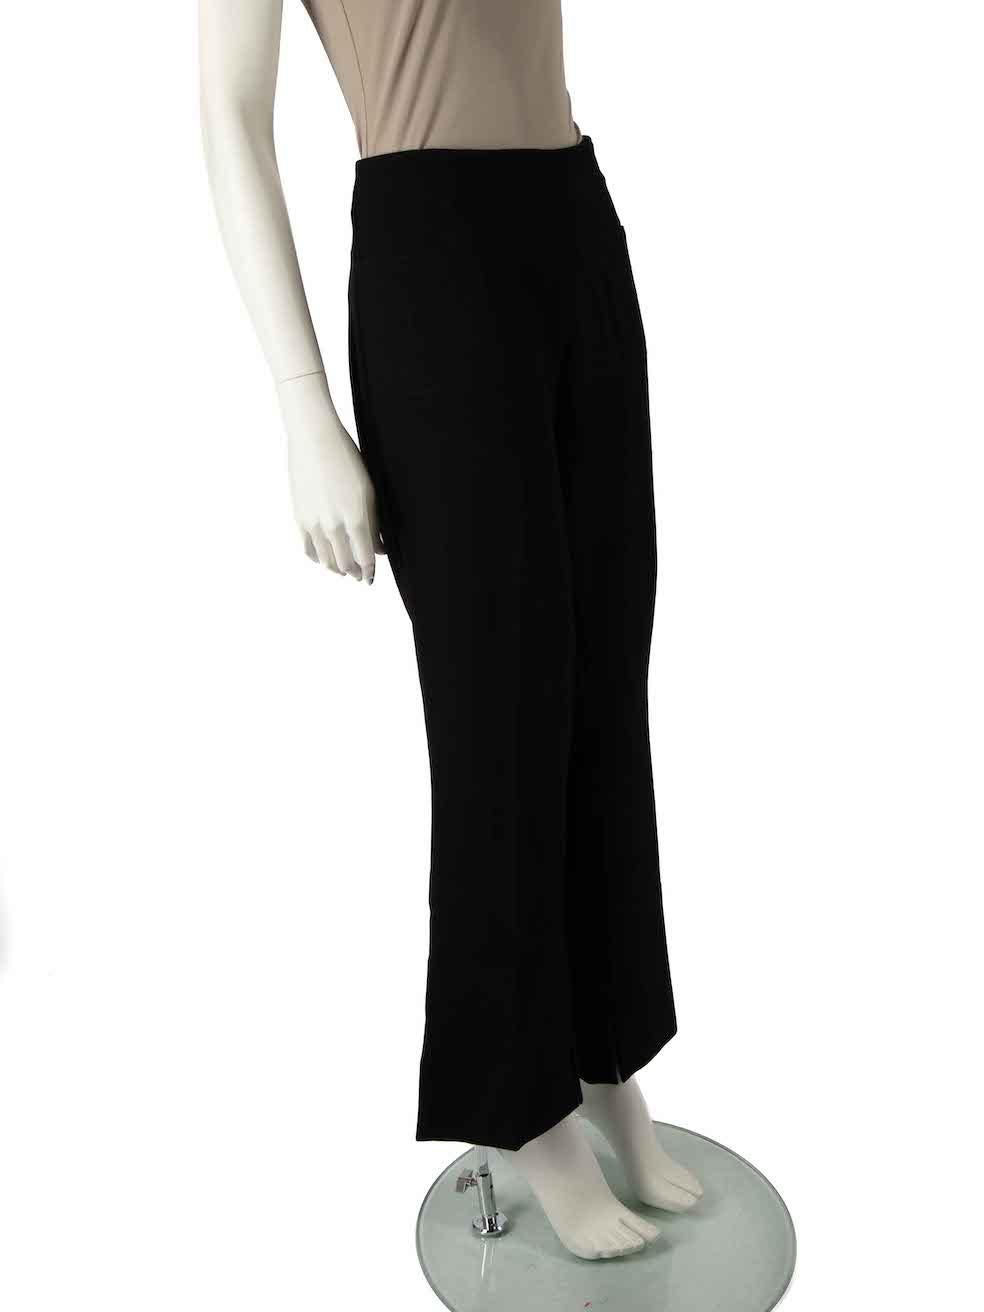 CONDITION is Very good. Minimal wear to trousers is evident. Minimal wear to the inside leg rise with pilling on this used Roland Mouret designer resale item.
 
 
 
 Details
 
 
 Black
 
 Polyester
 
 Trousers
 
 Flared
 
 Mid rise
 
 2x Front